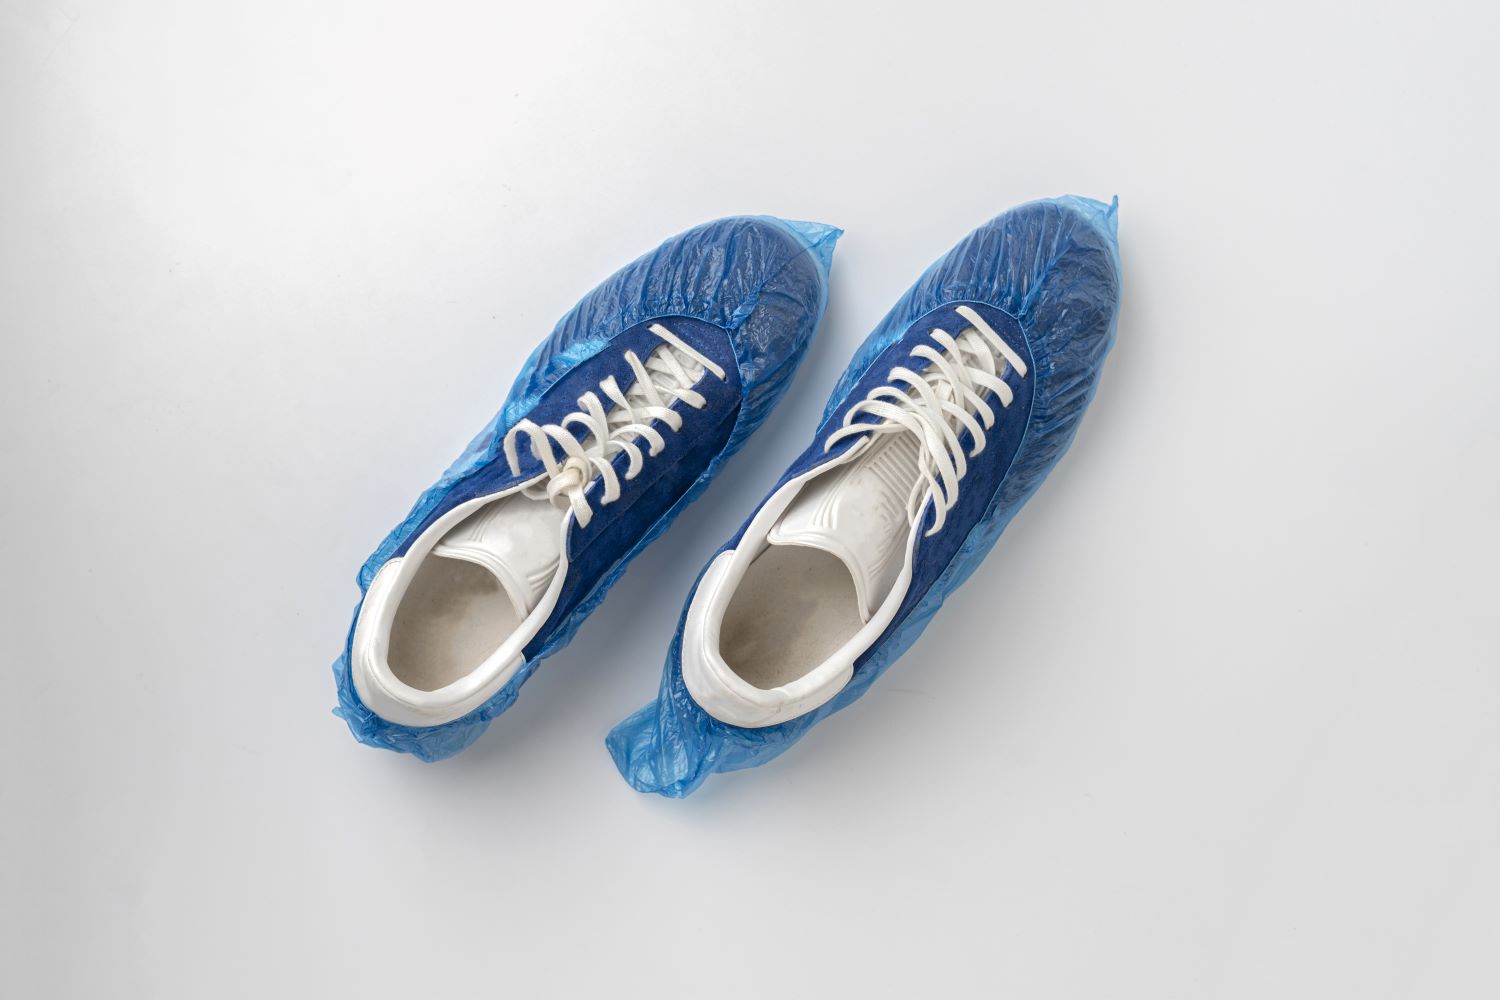 Blue and white sneakers inside shoe bootie covers.